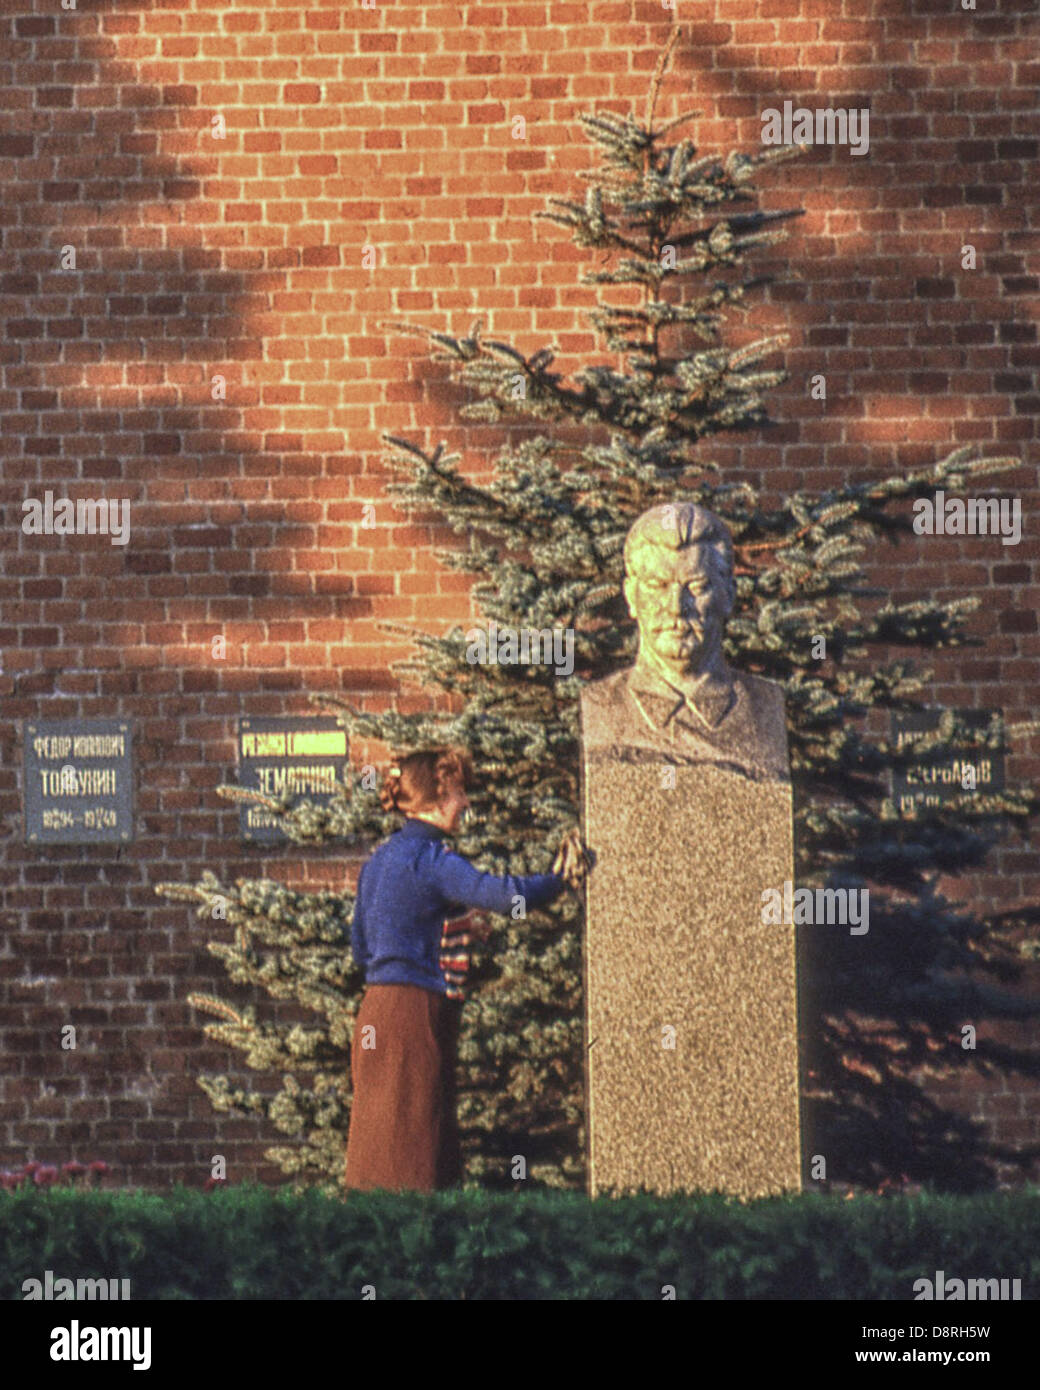 May 9, 1984 - Moscow, RU - A cleaning woman polishes the bust of Soviet Dictator Joseph Stalin (1878 - 1953), that marks his last resting place, a grave in the Kremlin Wall Necropolis behind Lenin's Mausoleum in Moscow His body was originally placed in Leninâ€™s Mausoleum, but in 1961 it was removed and buried here. (Credit Image: © Arnold Drapkin/ZUMAPRESS.com) Stock Photo